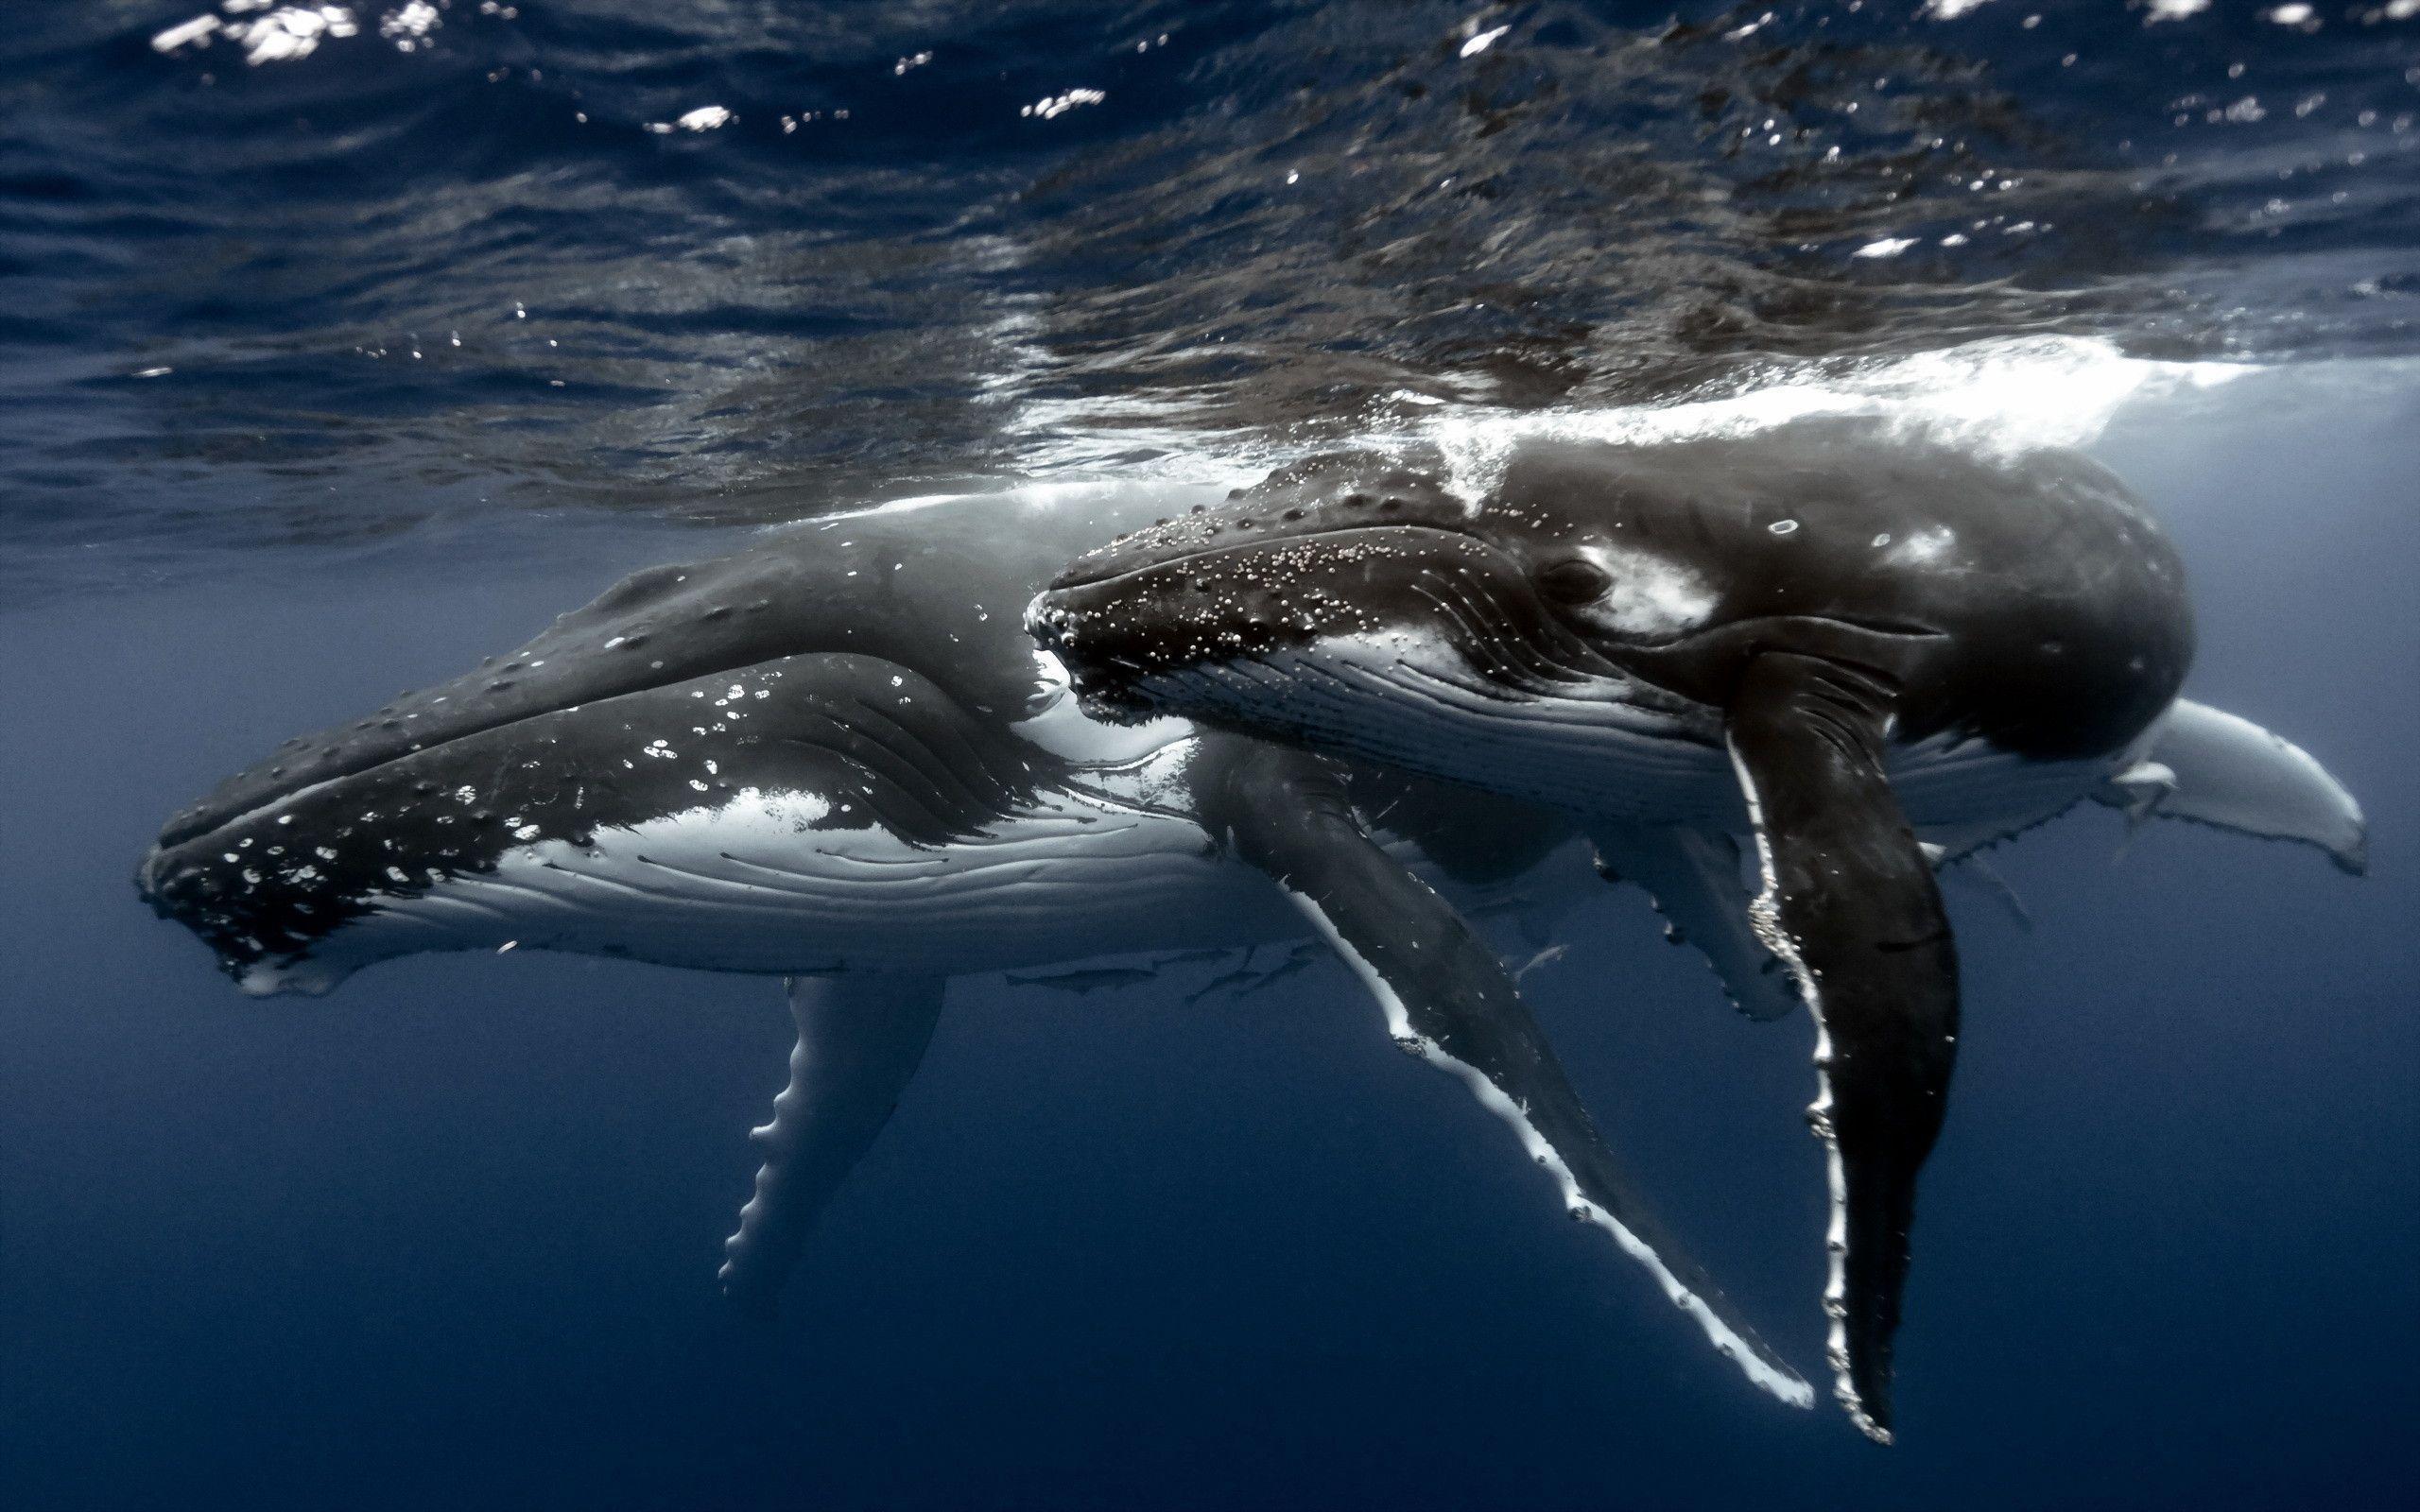 Whale Image